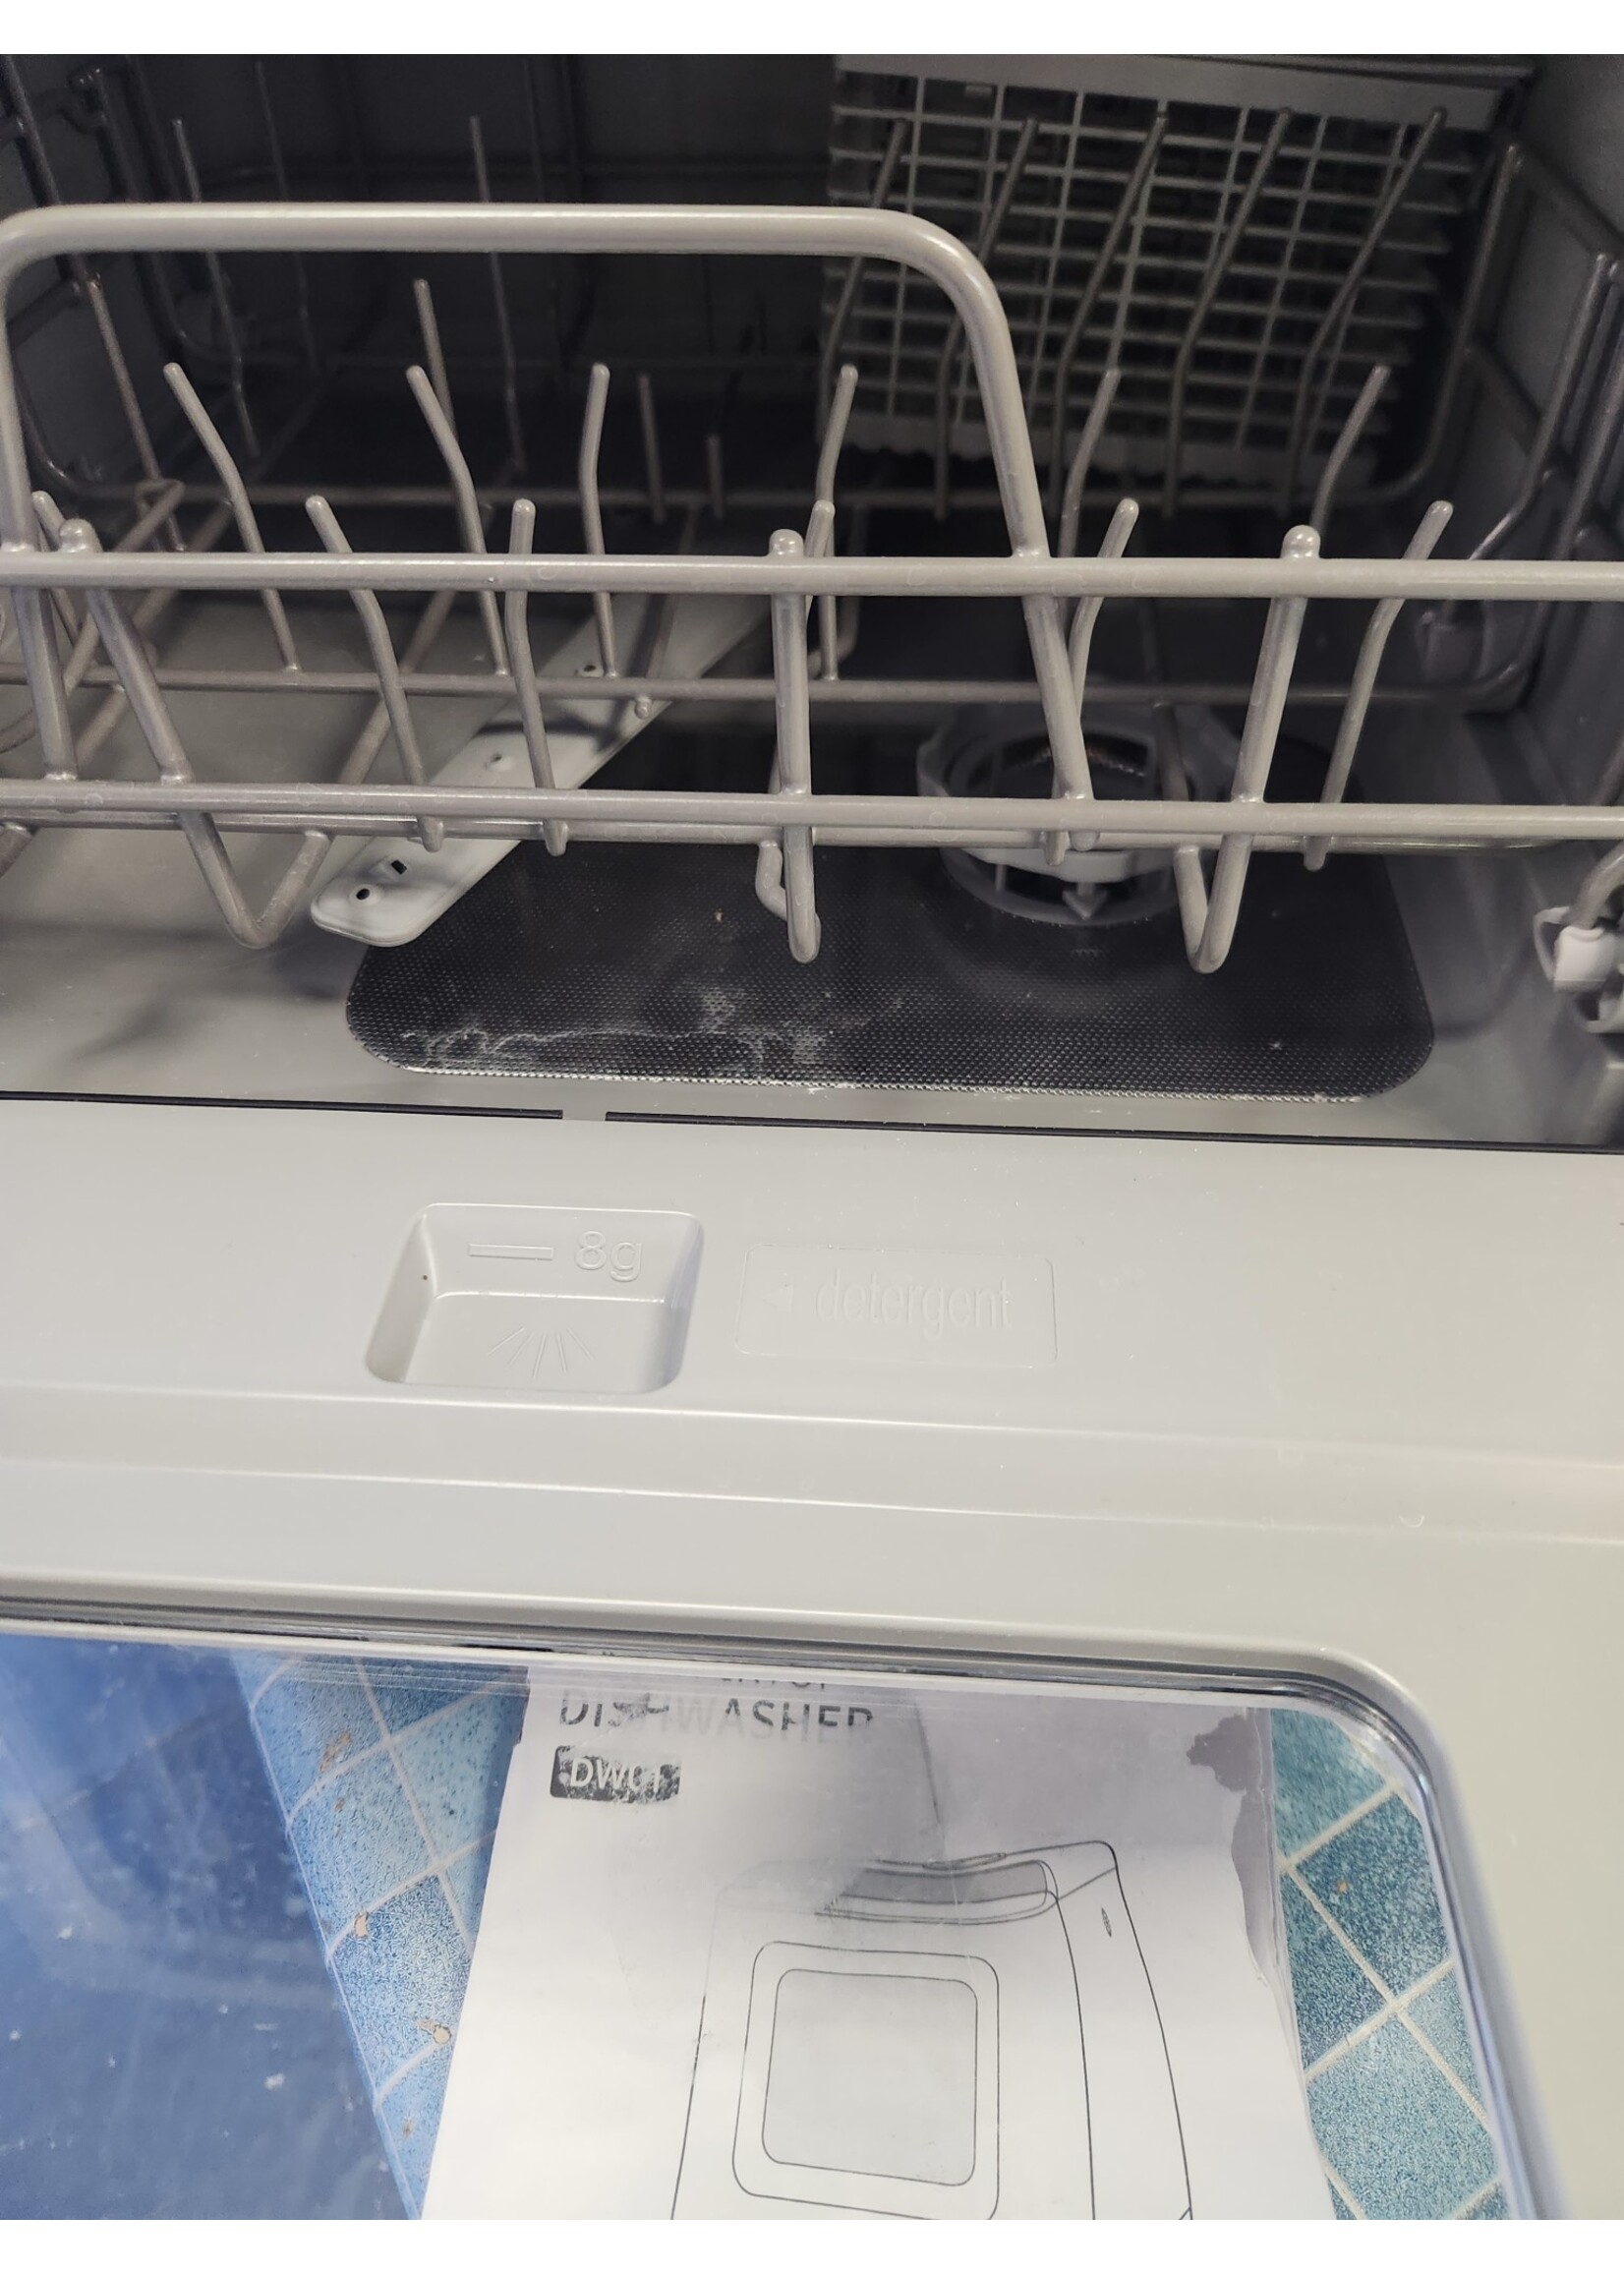 PORTABLE COUNTERTOP DISHWASHER!!Barely Used! for Sale in Las Vegas